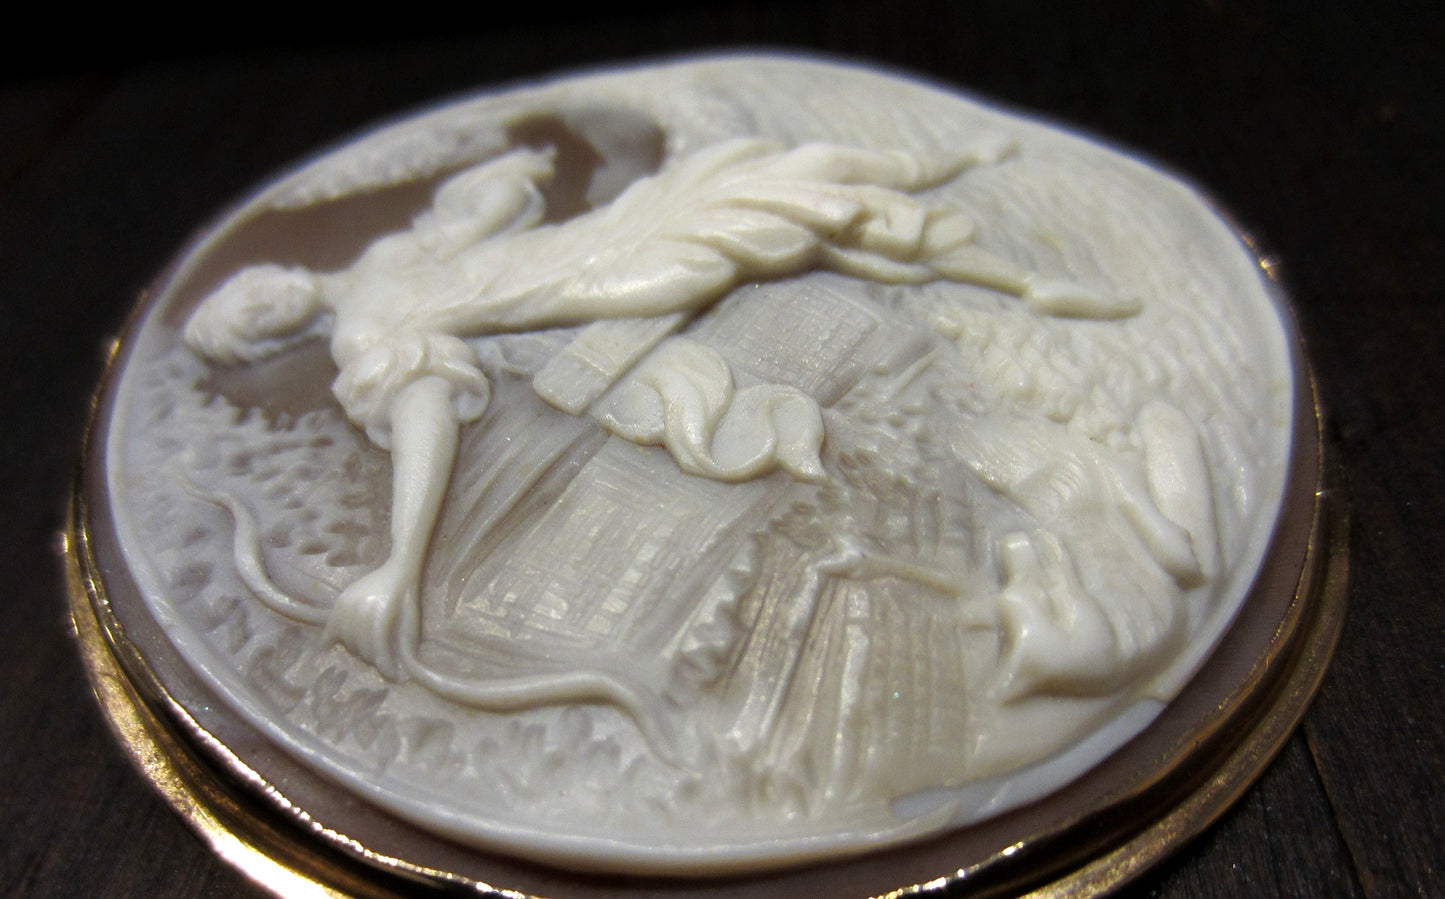 SOLD--Vintage Diana the Huntress Shell Cameo Brooch/Pendant 14k, c. 1960